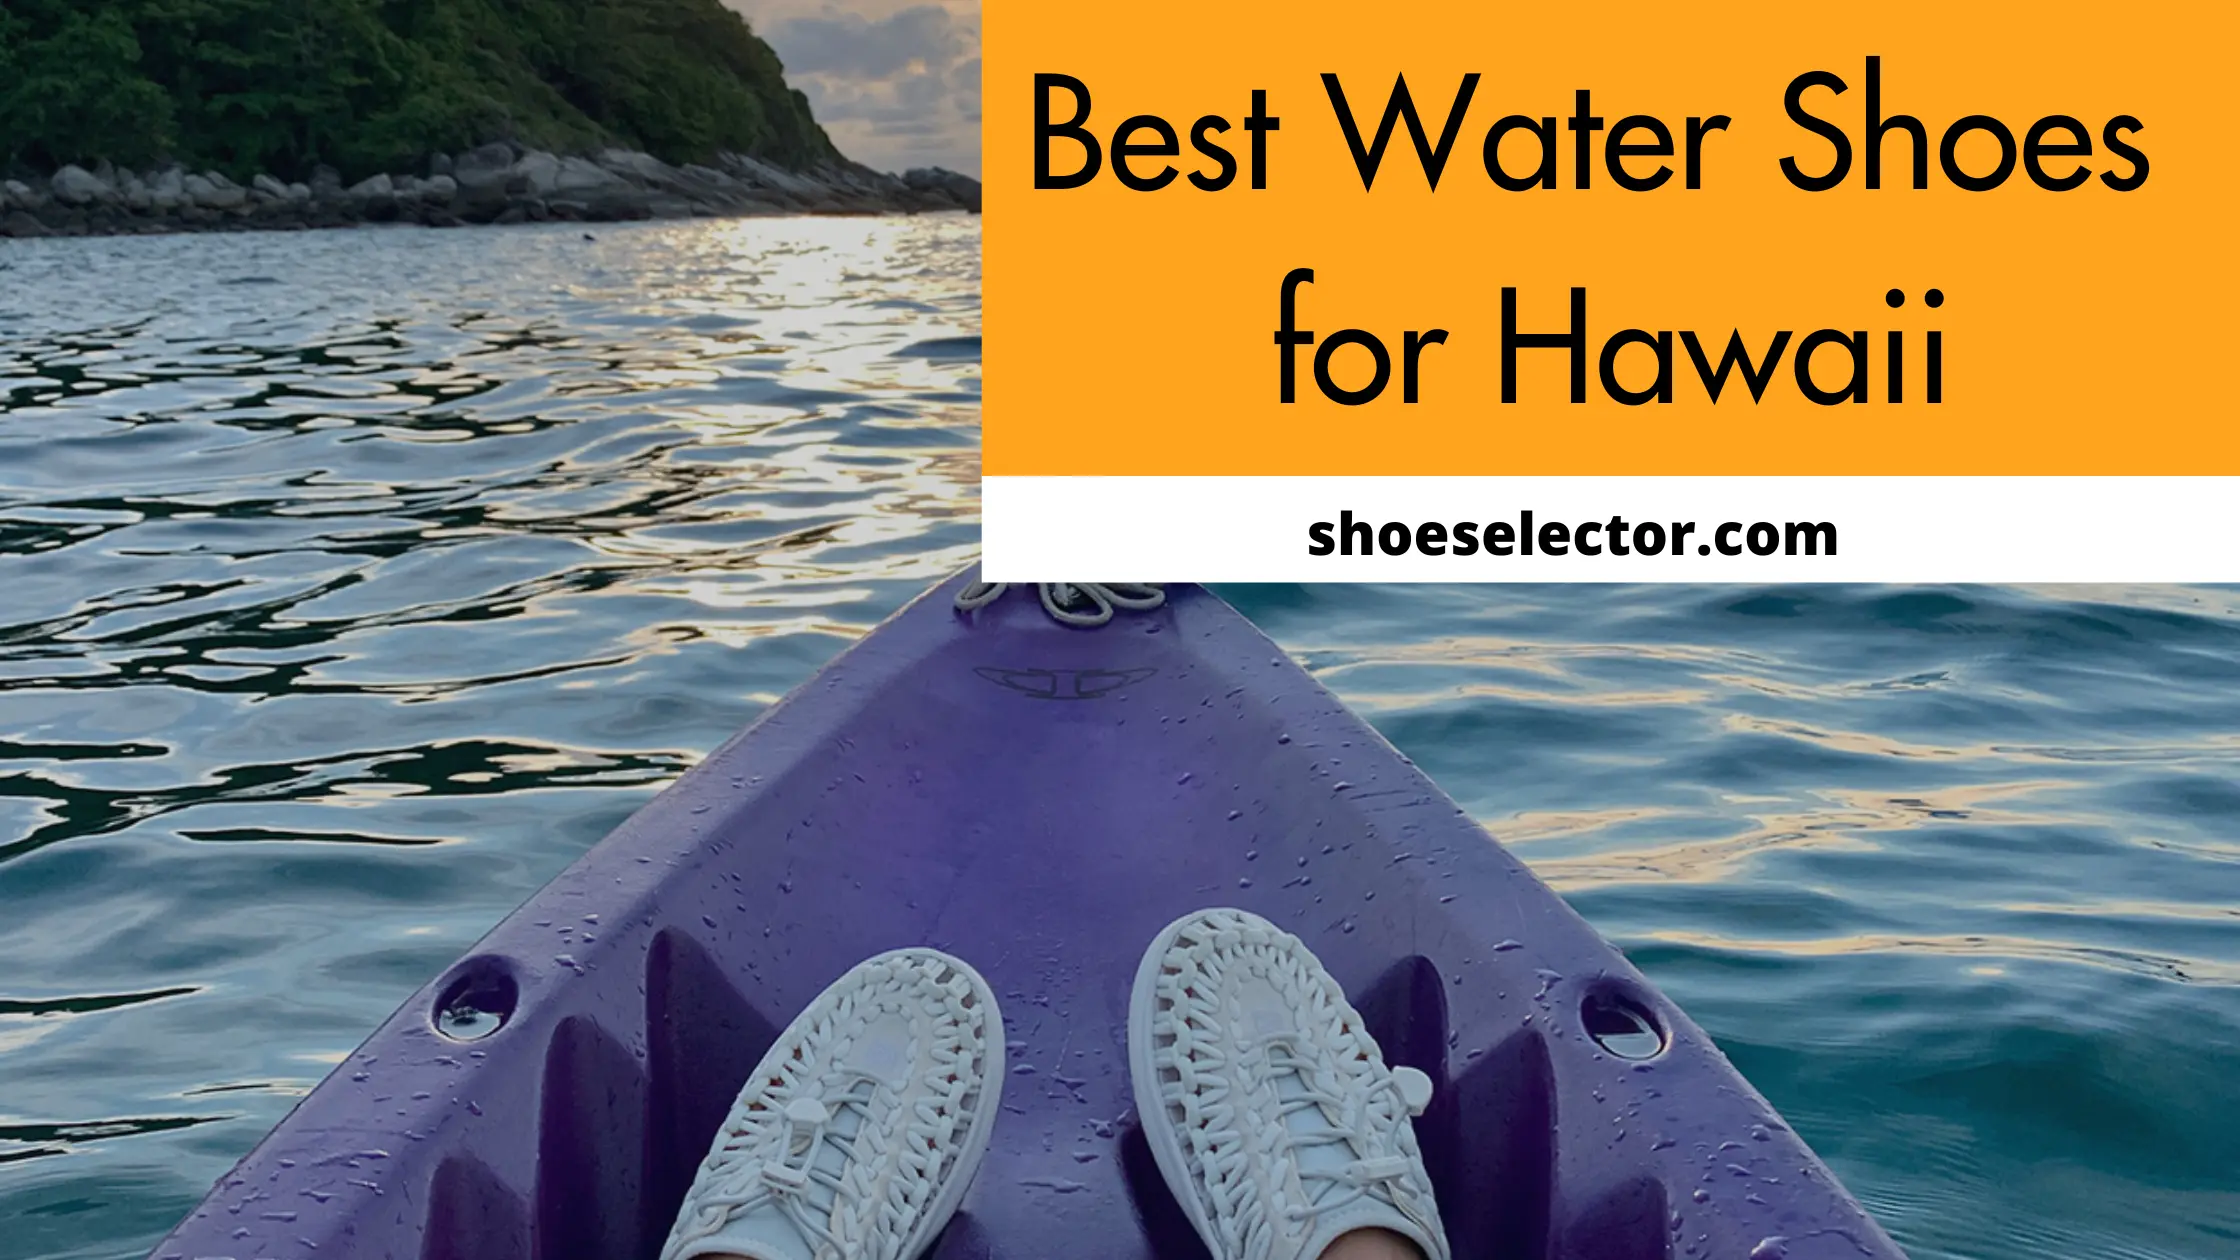 Best Water Shoes For Hawaii - Complete Buying Guides